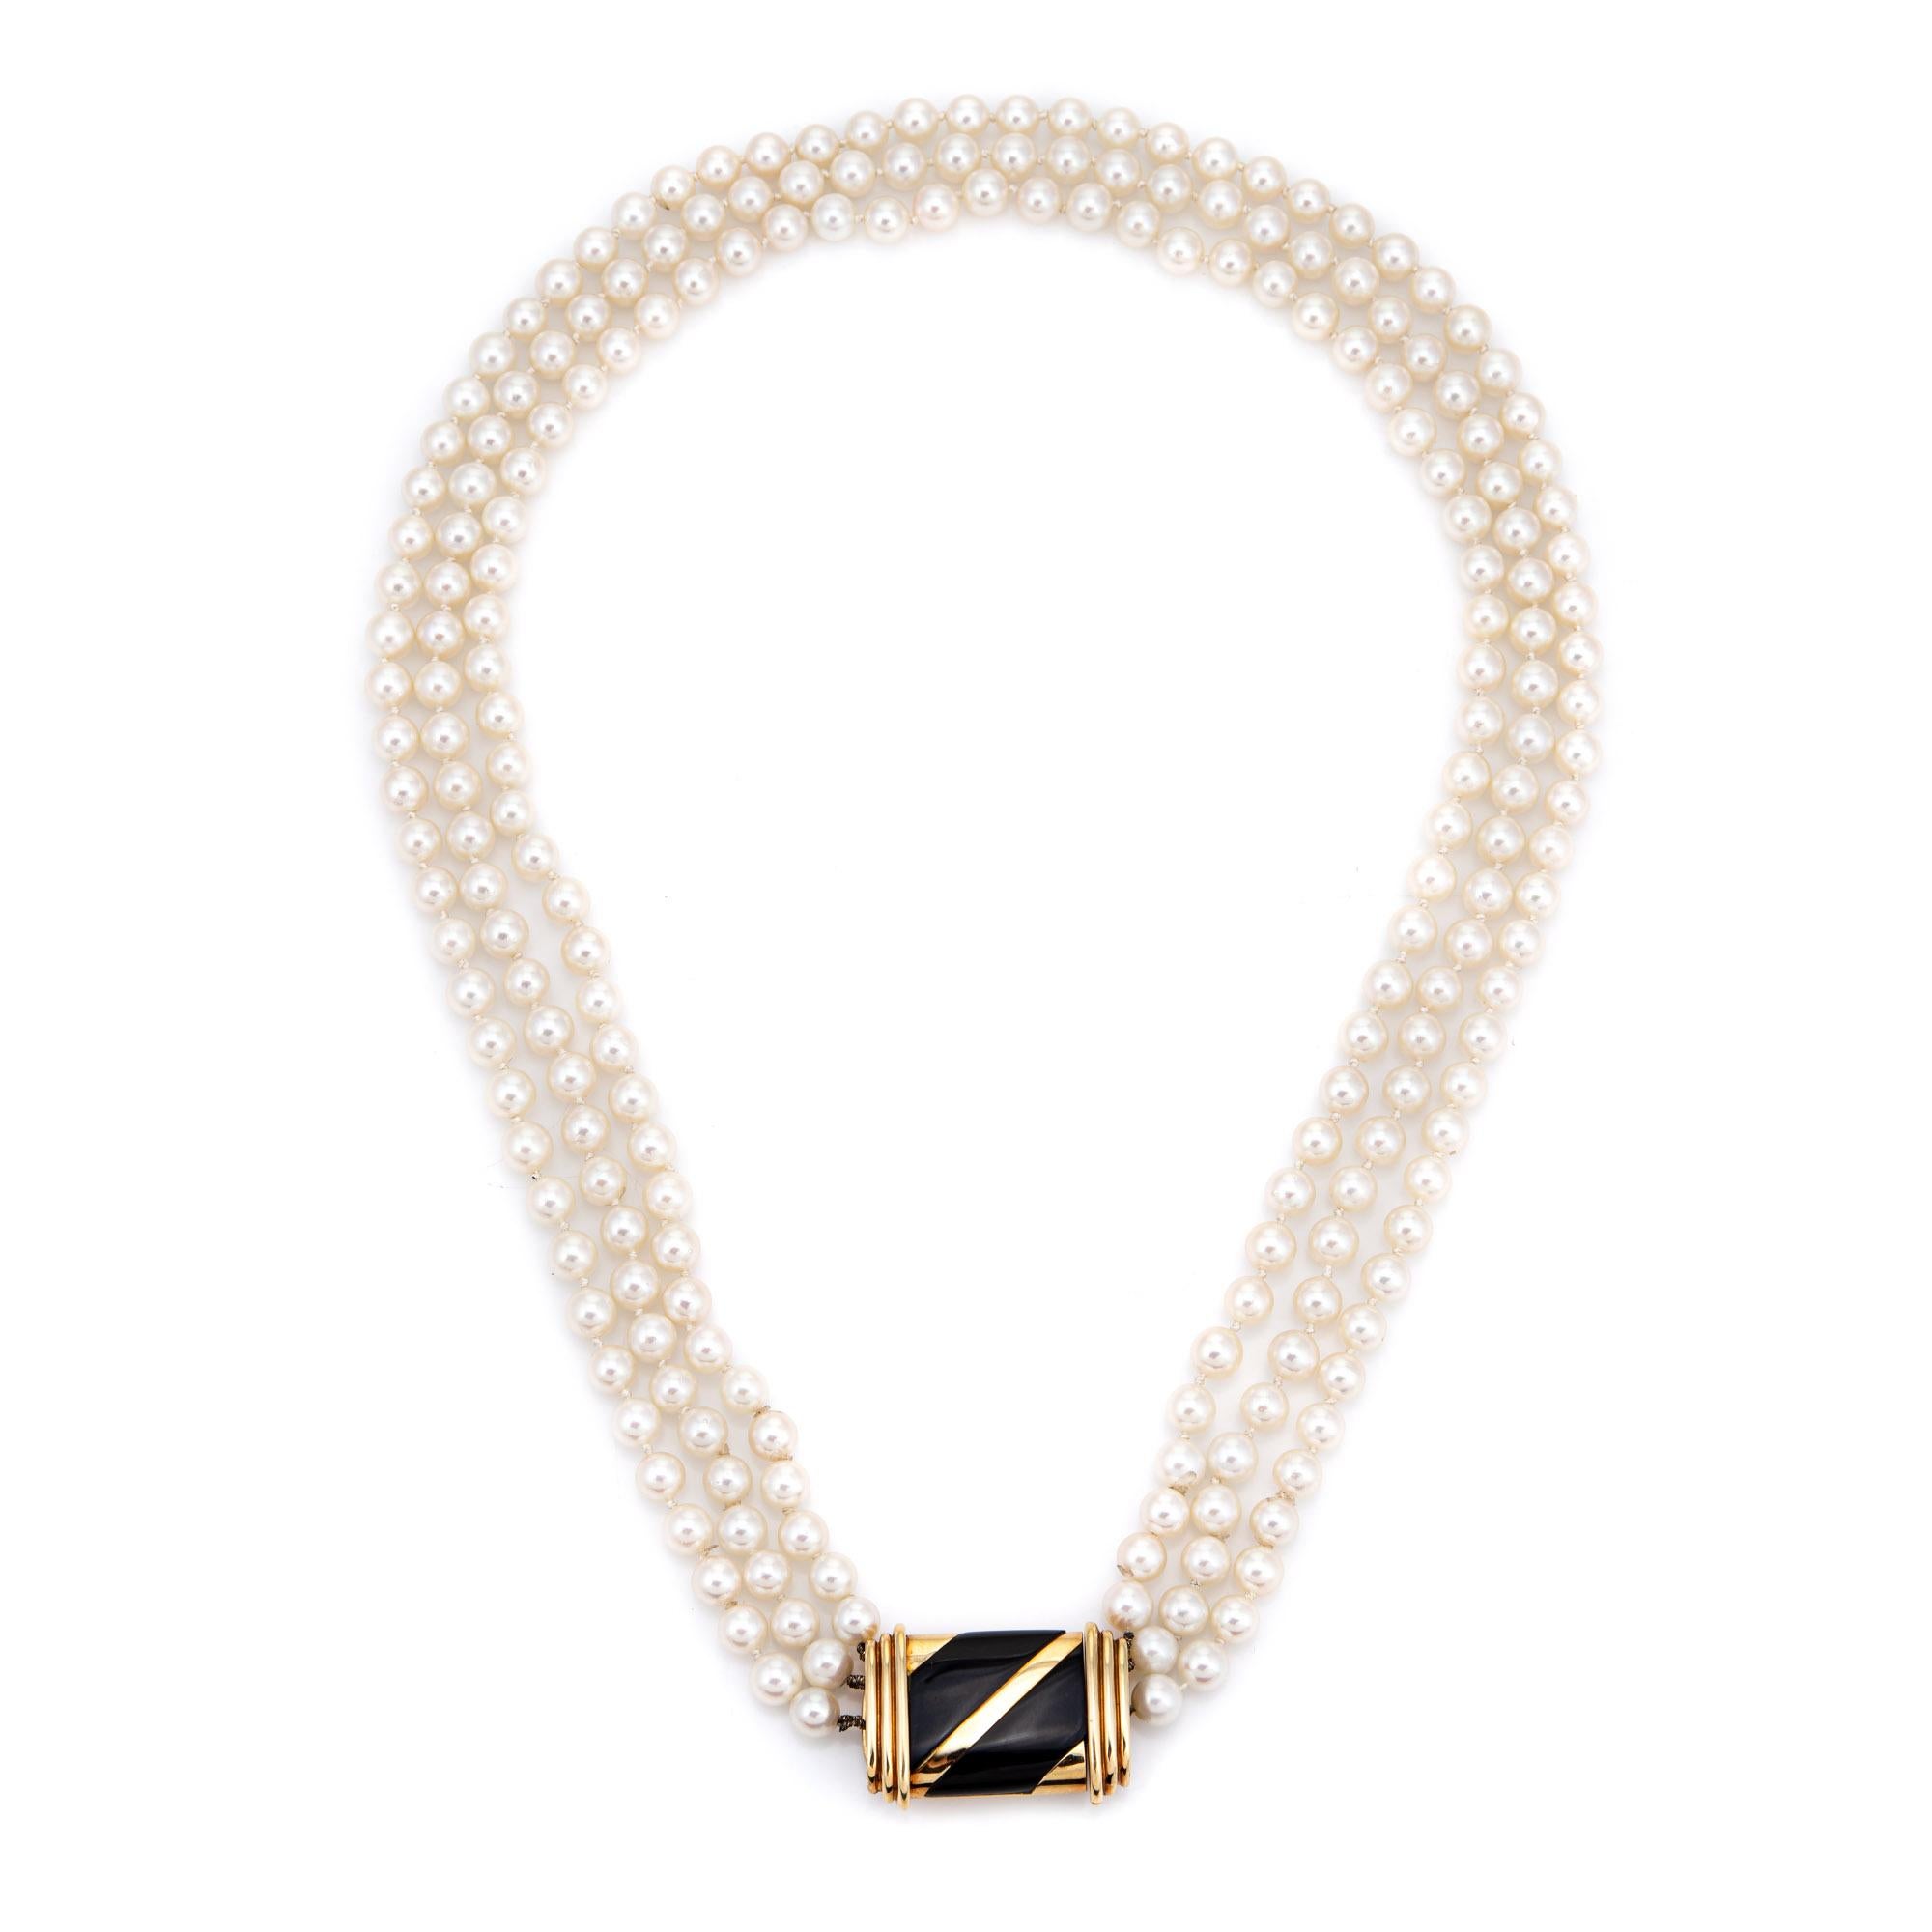 Stylish vintage Cartier triple stand cultured pearl necklace (circa 1960s to 1970s) finished with an 18k gold onyx inlaid clasp.  

Cultured pearls are uniform in size and measure 6mm, strung onto three strands. The pearls are lustrous with a thick